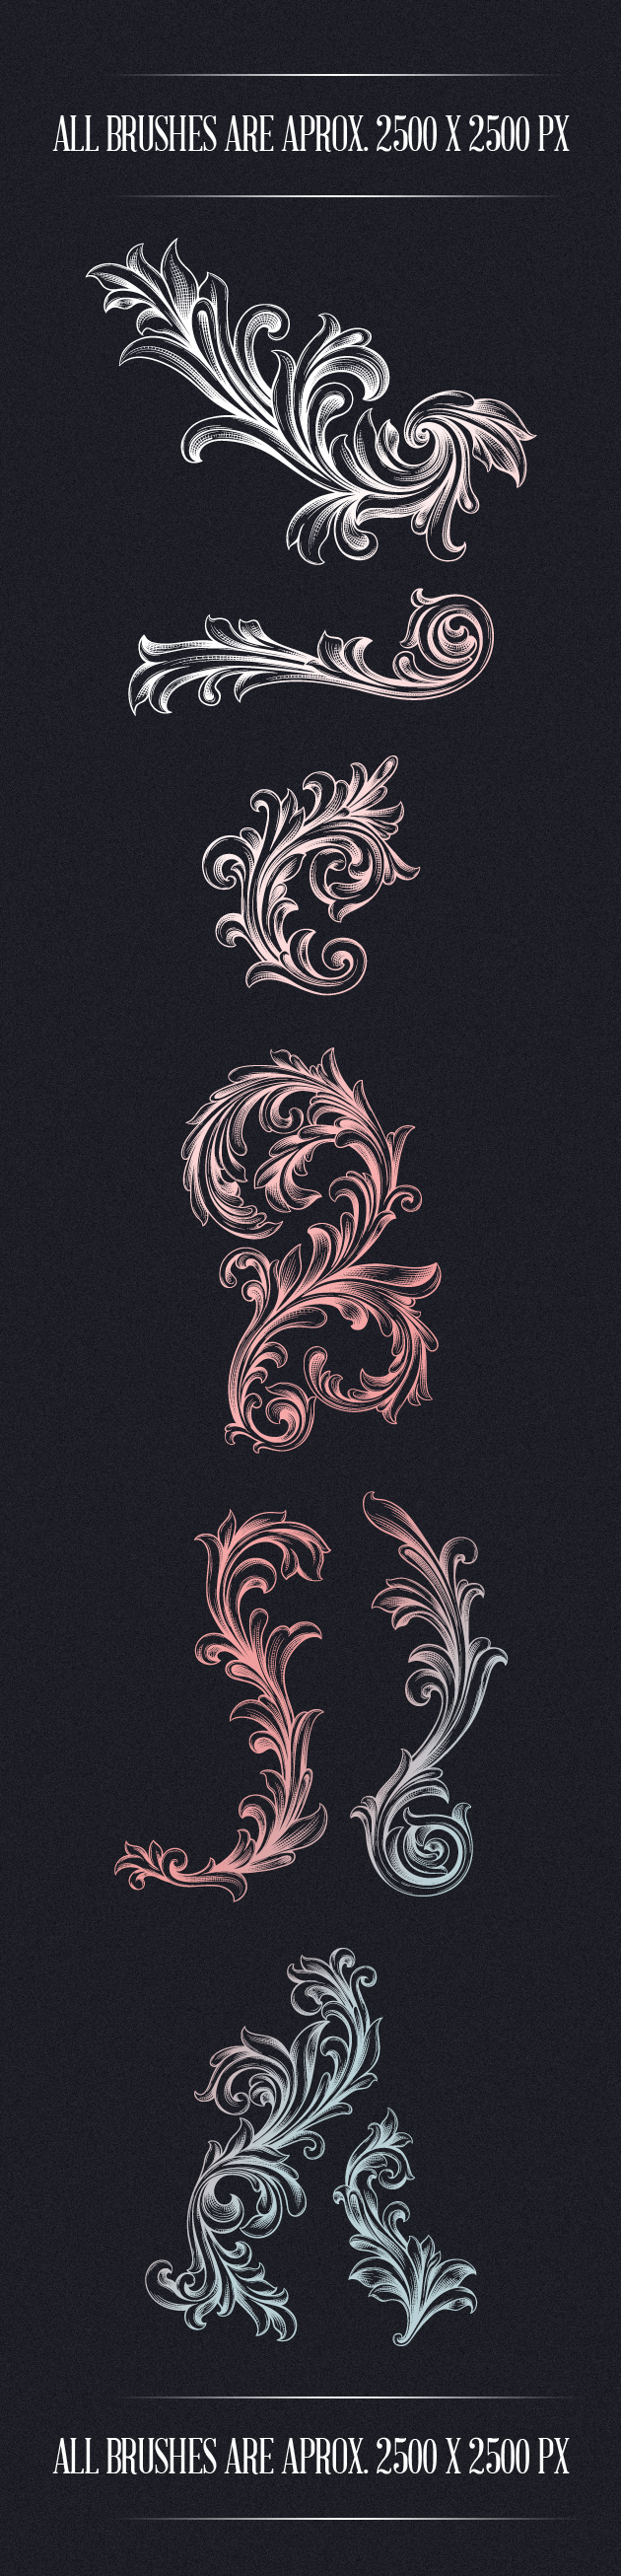 Engraved Floral Photoshop Brushes 2